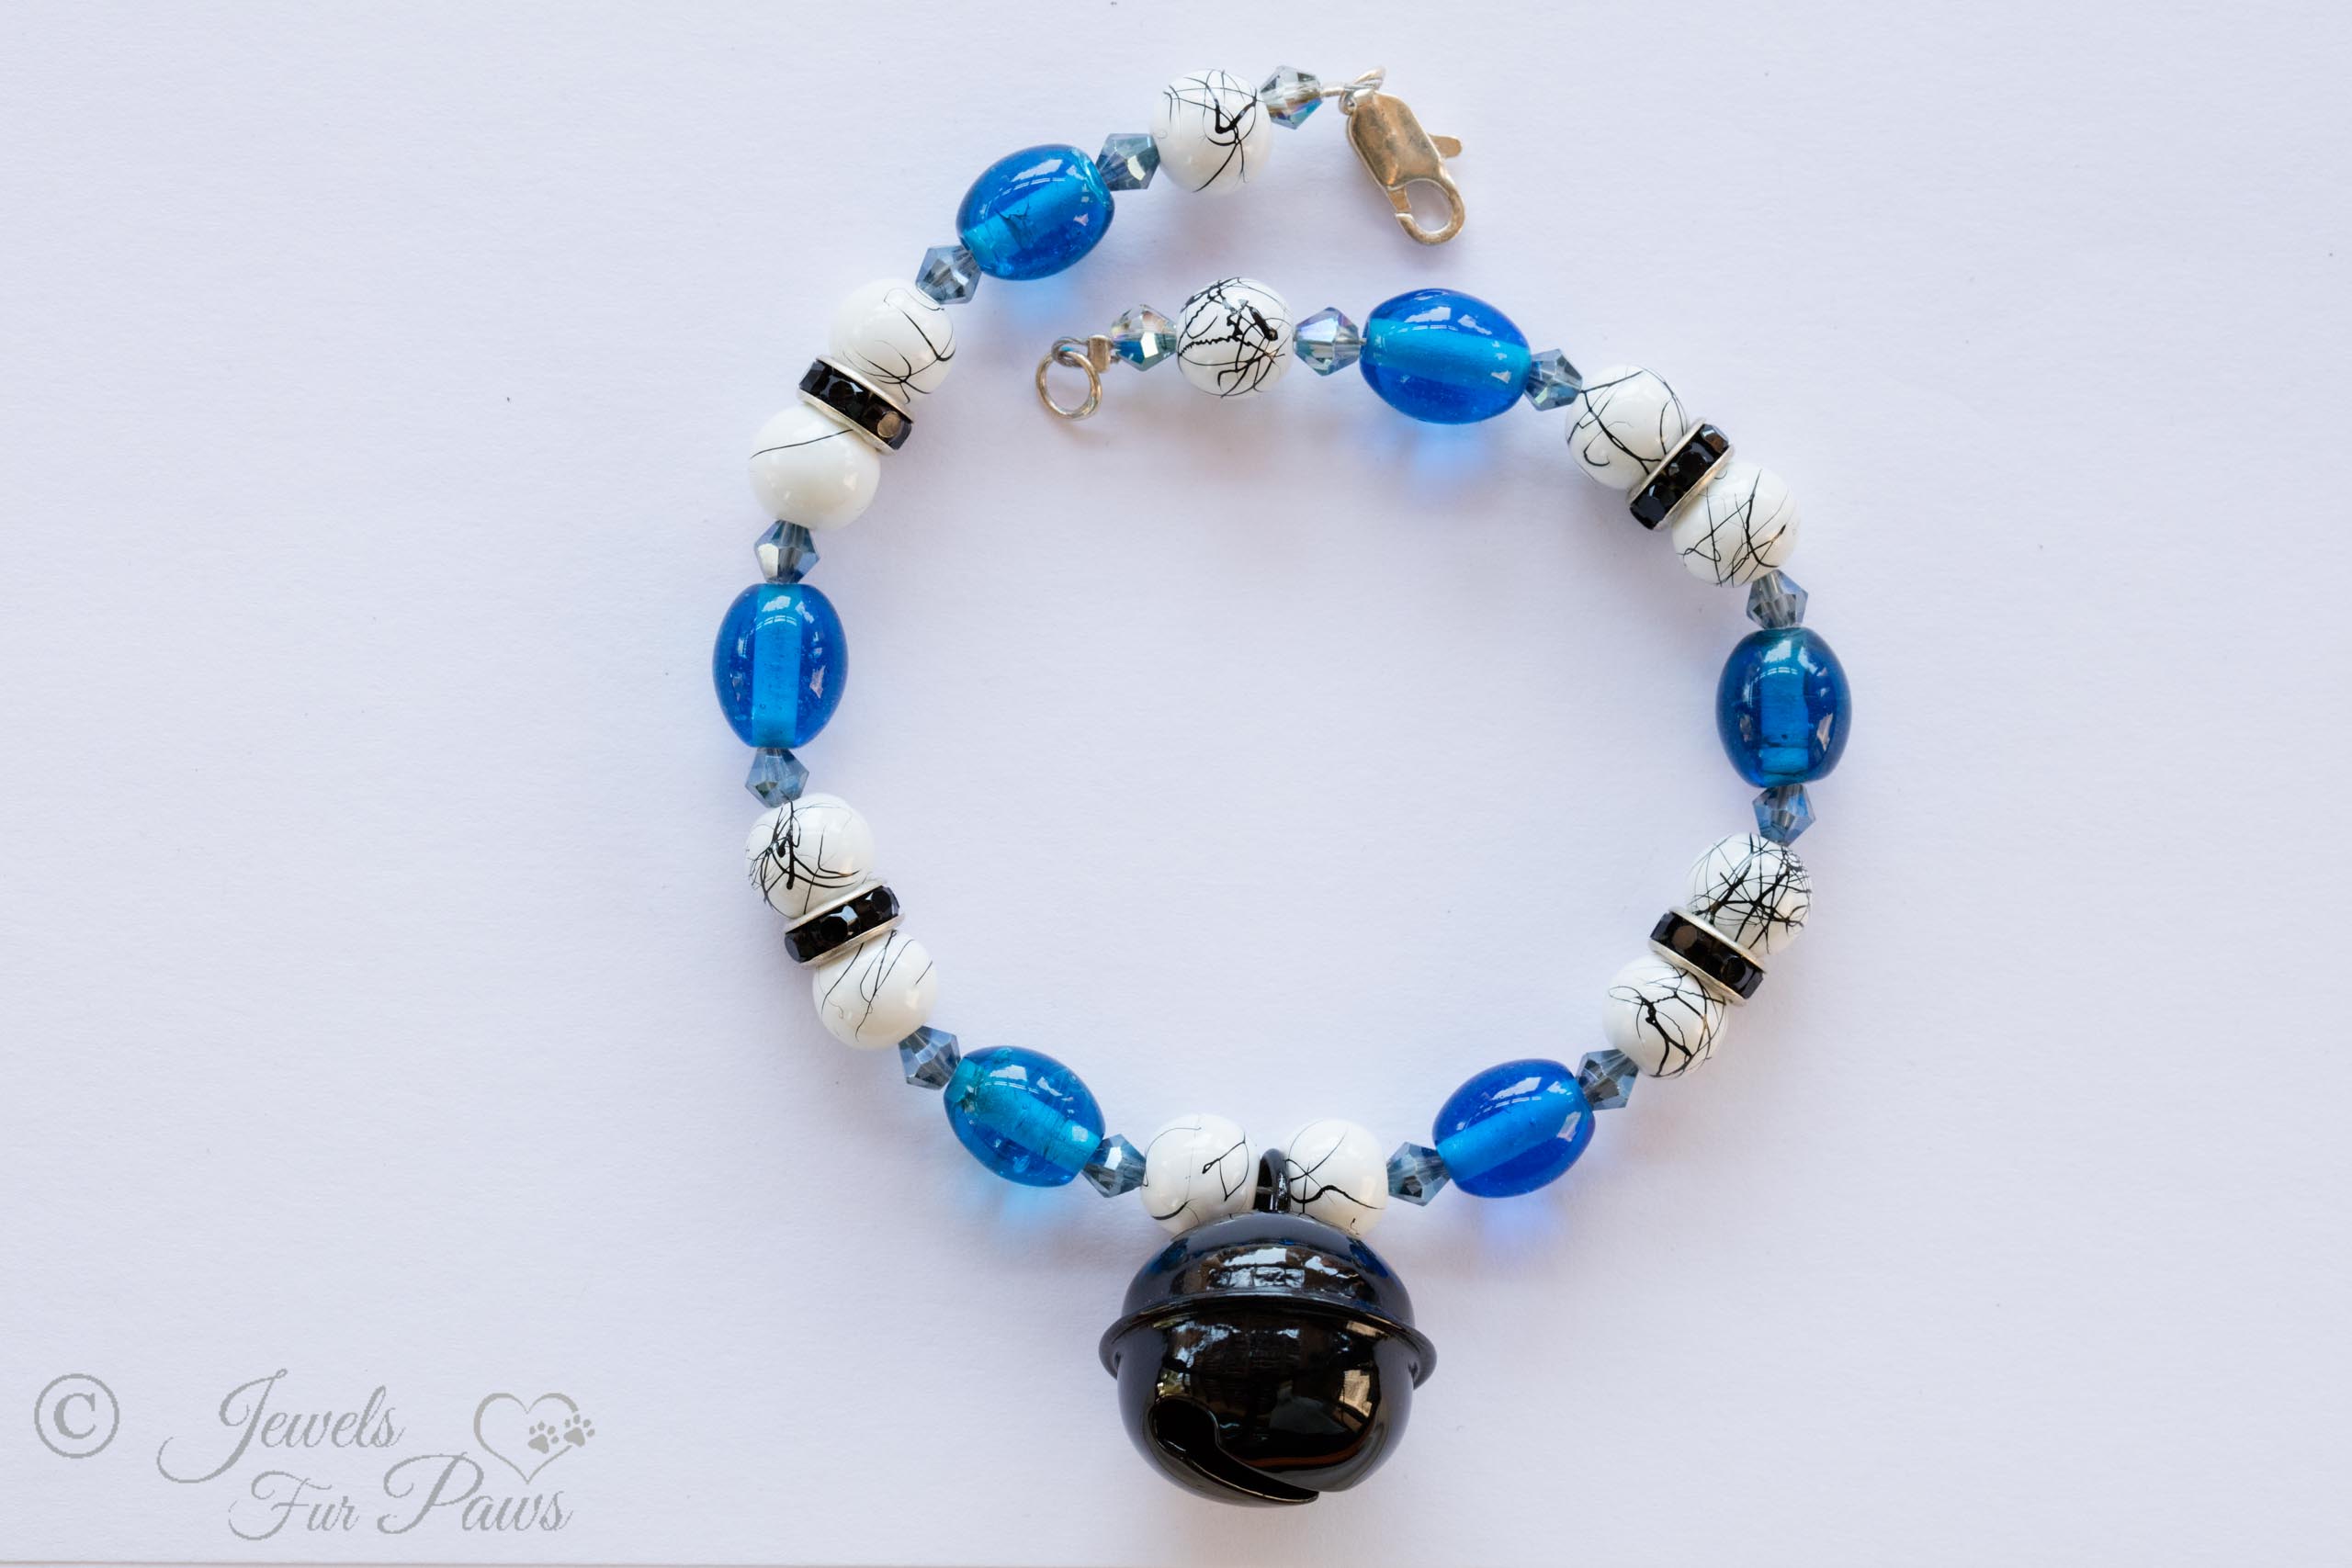 white and black marbleized beads with blue oval crystals and a hanging black bell on white background and black rhinestone spacers